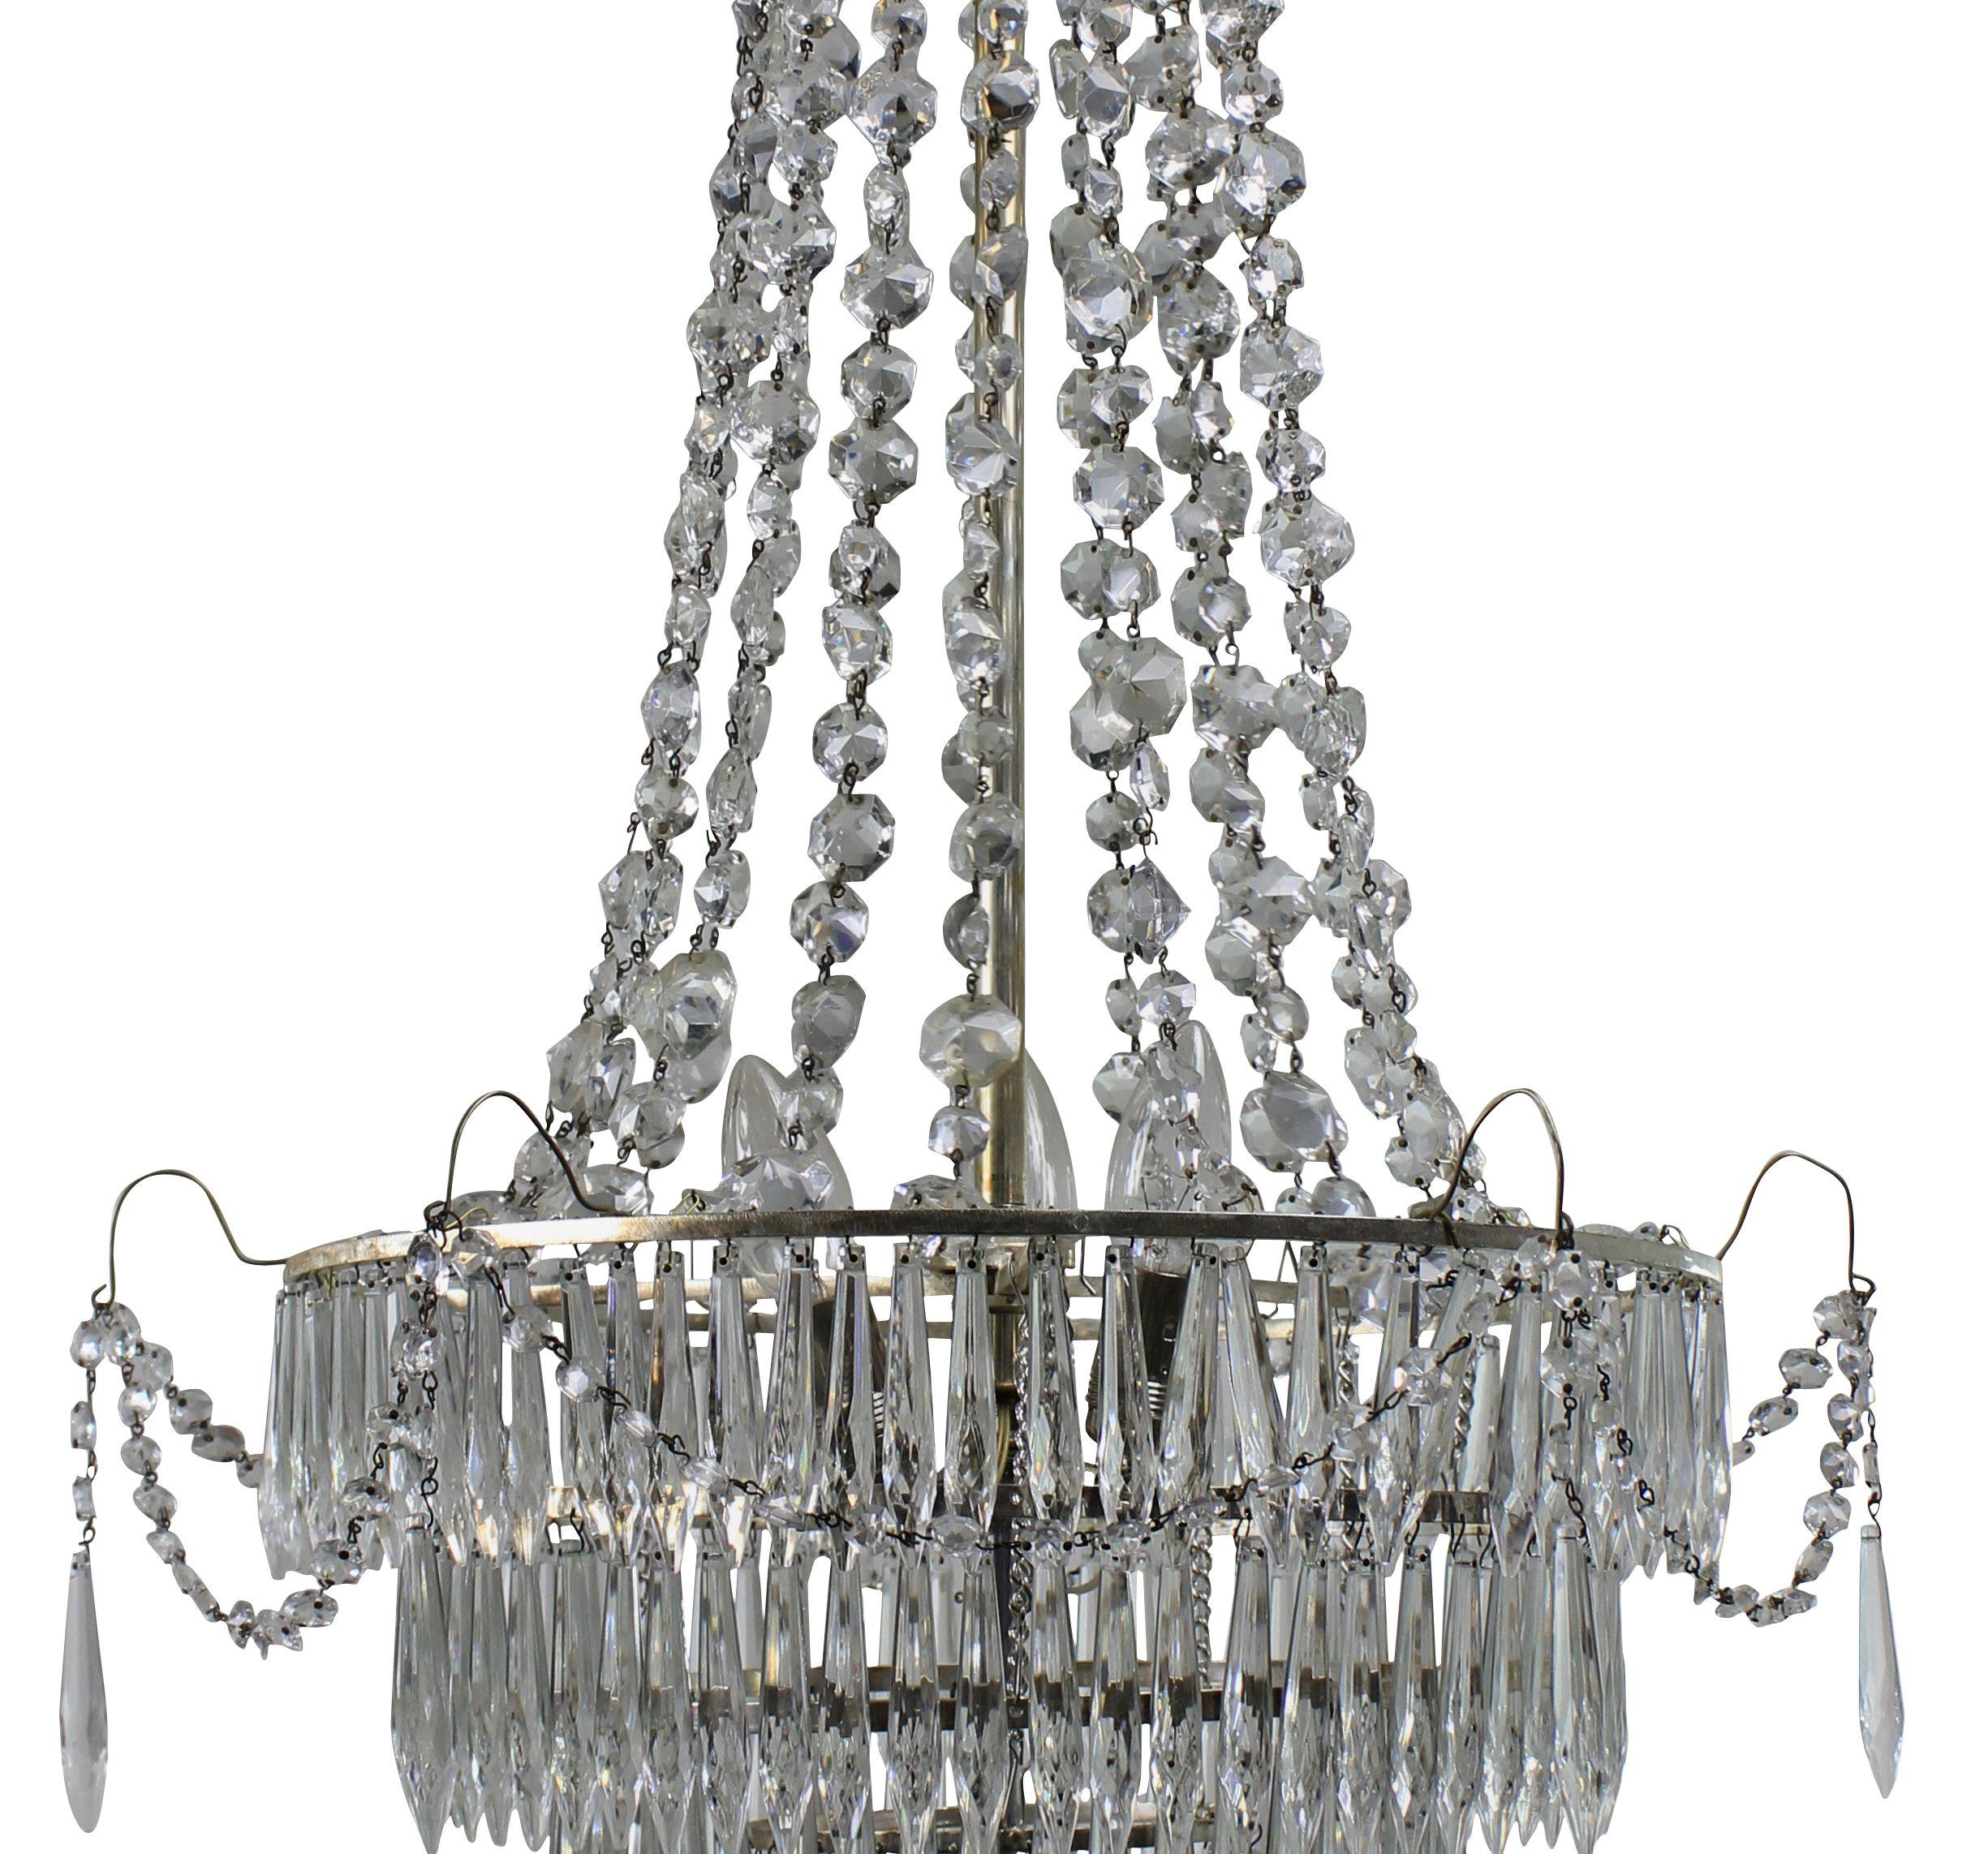 Pair of Swedish Tent and Waterfall Chandeliers (Mitte des 20. Jahrhunderts)